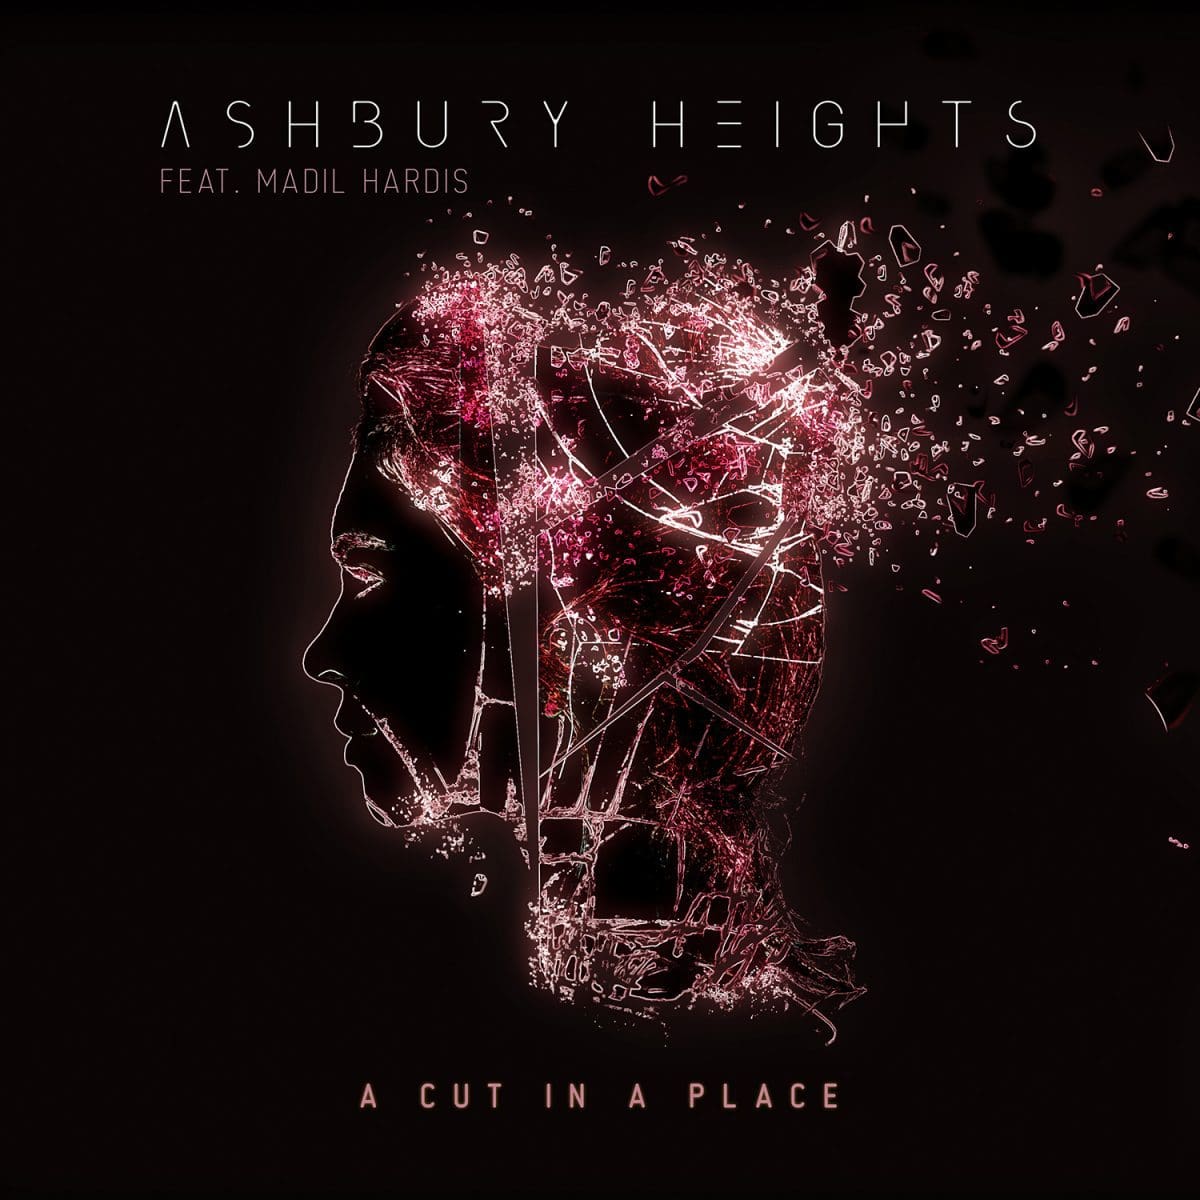 Ashbury Heights returns with 'A Cut in a Place' single featuring Madil Hardis